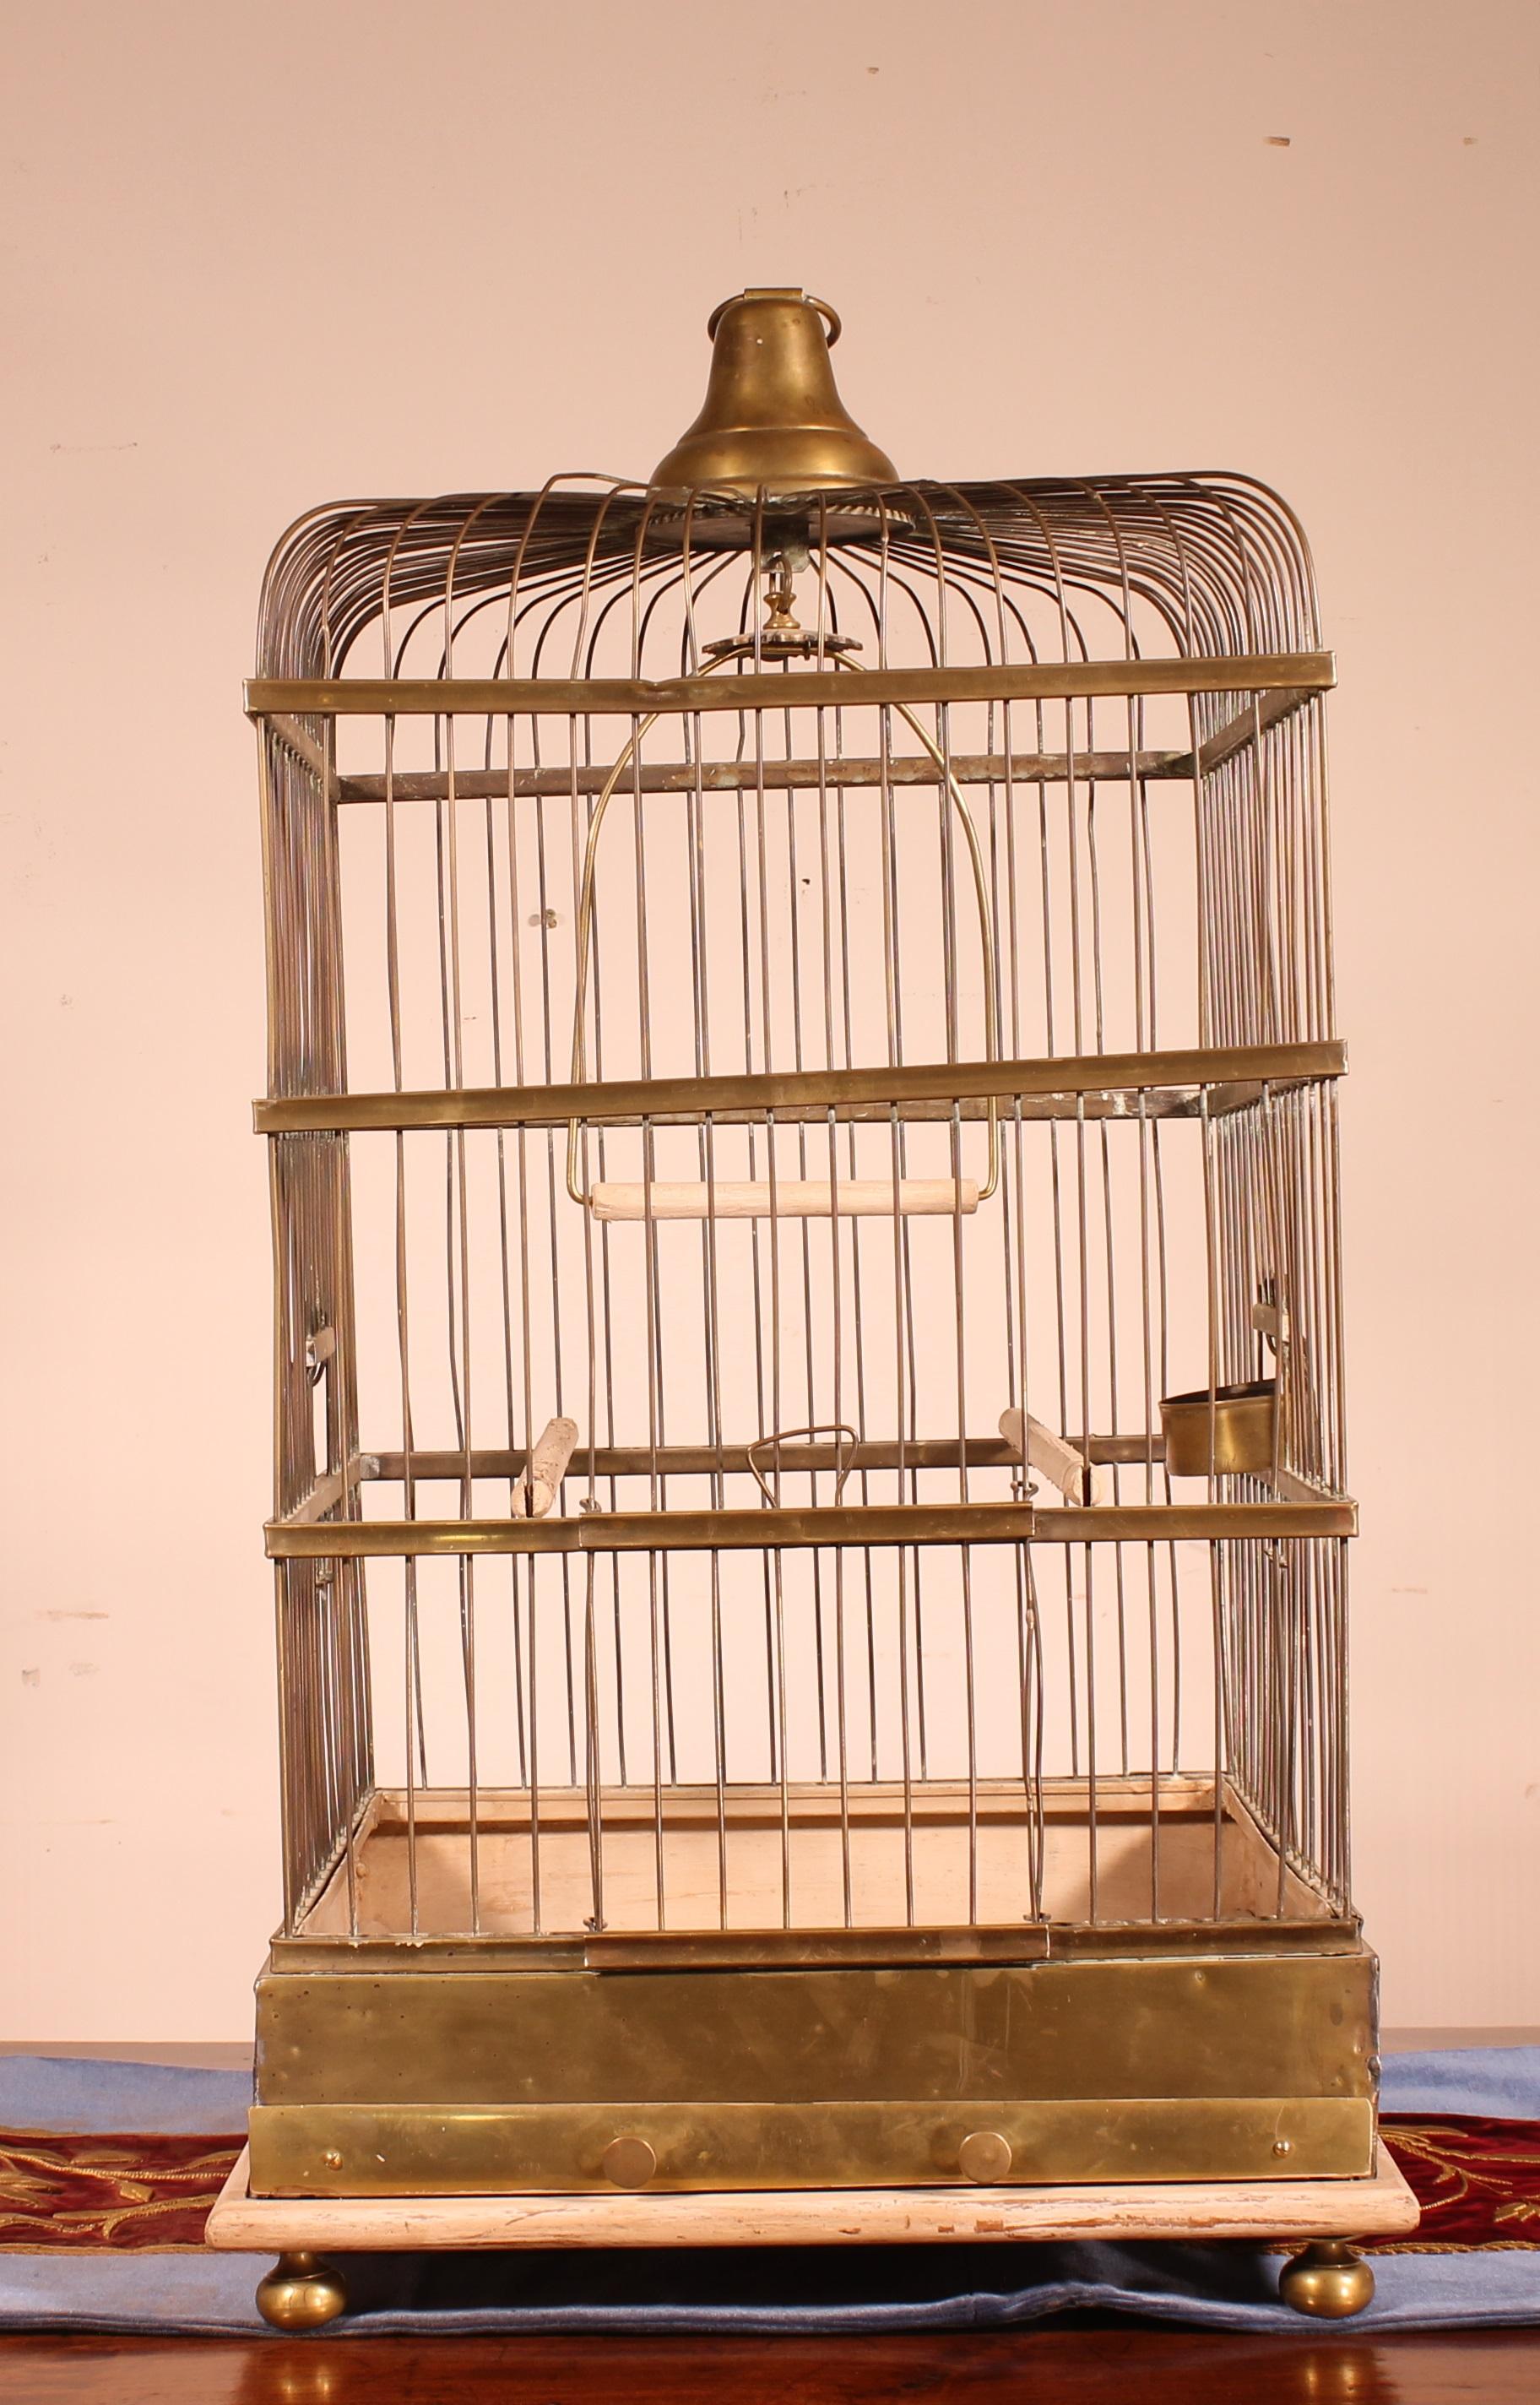 Elegant parrot cage in brass and wood in superb condition
Very beautiful French work from the 19th century
Beautiful collector's item and very decorative
a hook allows it to be suspended
restauration of use

Delivery to Belgium, France and